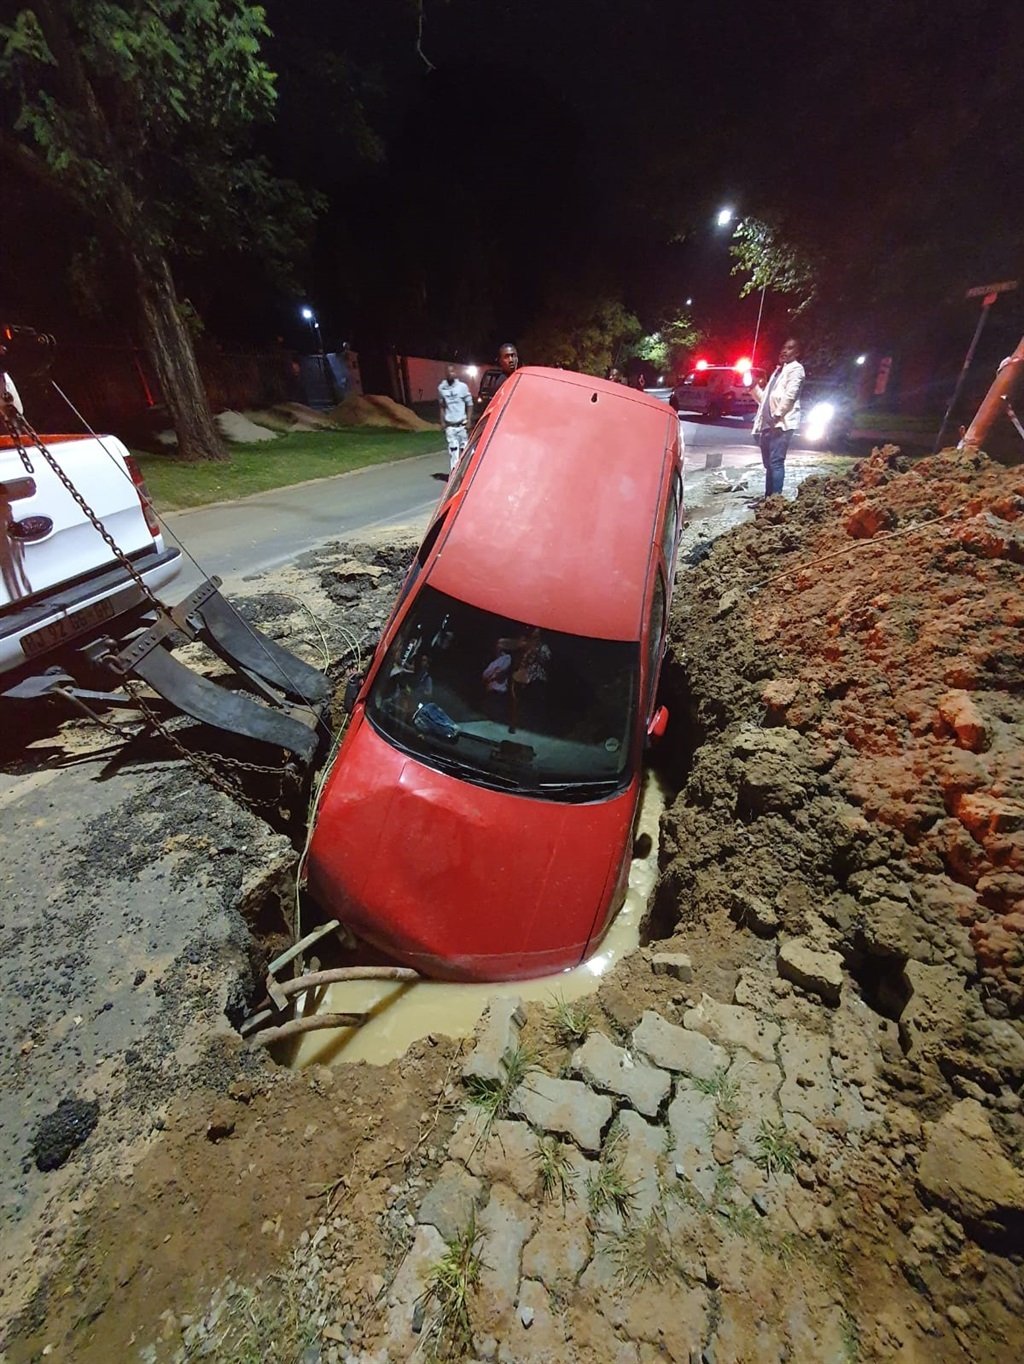 Red car crashed into deep hole left behind